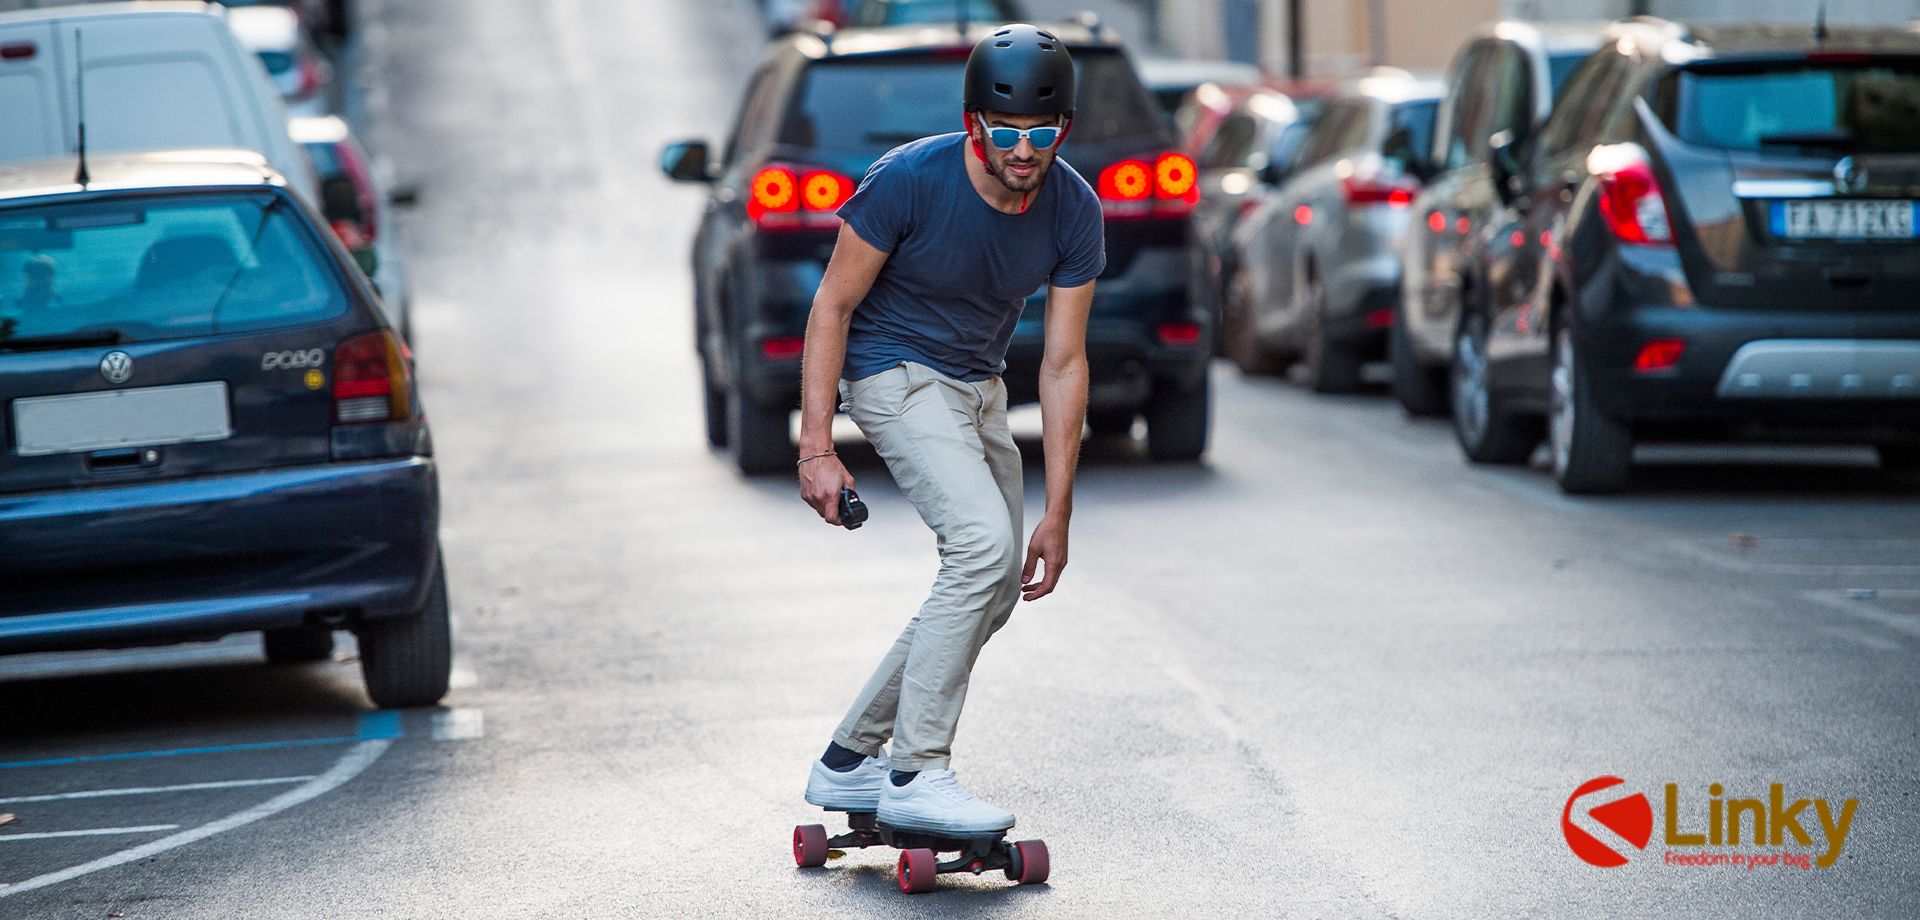 on Twitter: 3.26 inch (83 mm) wheels, Linky Foldable #Longboard is fully-equipped to conquer the #city. This board is designed to serve tireless city explorers with an #adventurous spirit.